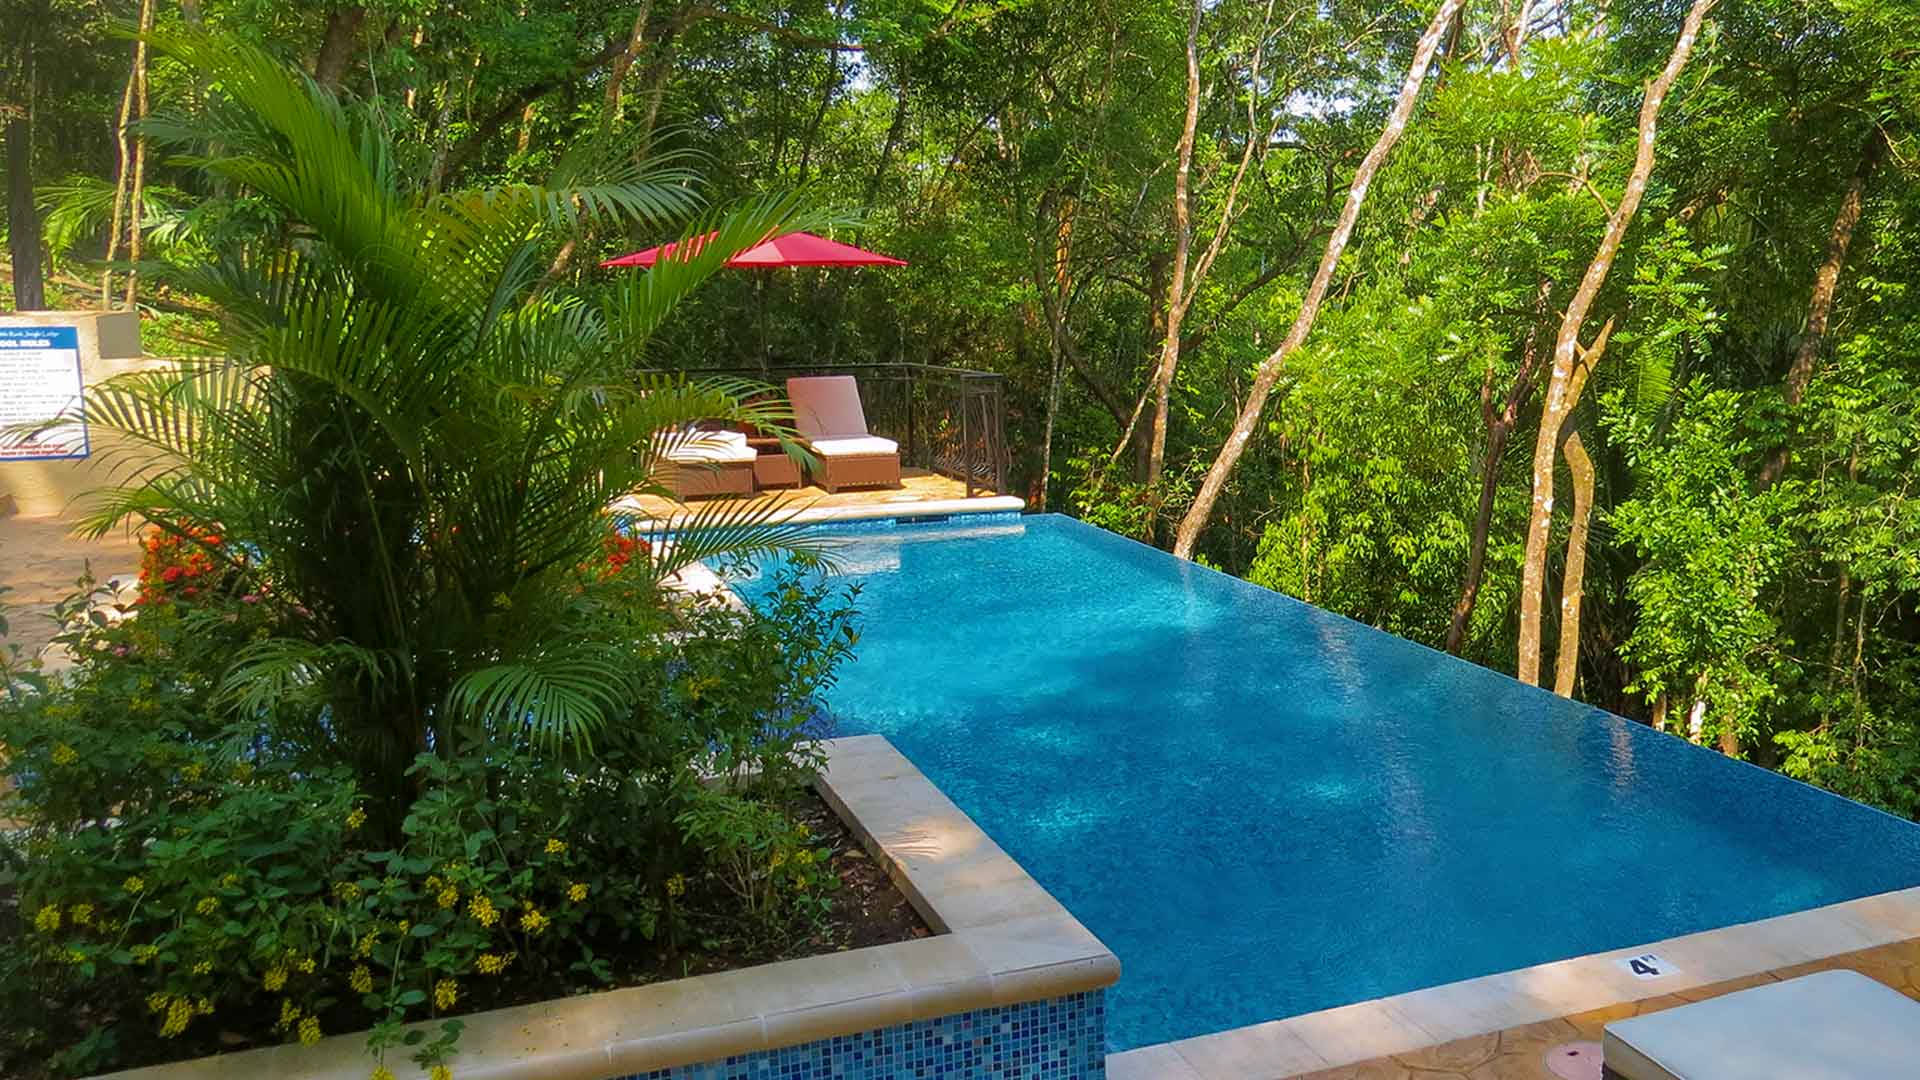 Tranquil swimming pool nestled amidst the dense, verdant Belizean forest, providing a serene oasis of relaxation and refreshment in a natural setting.